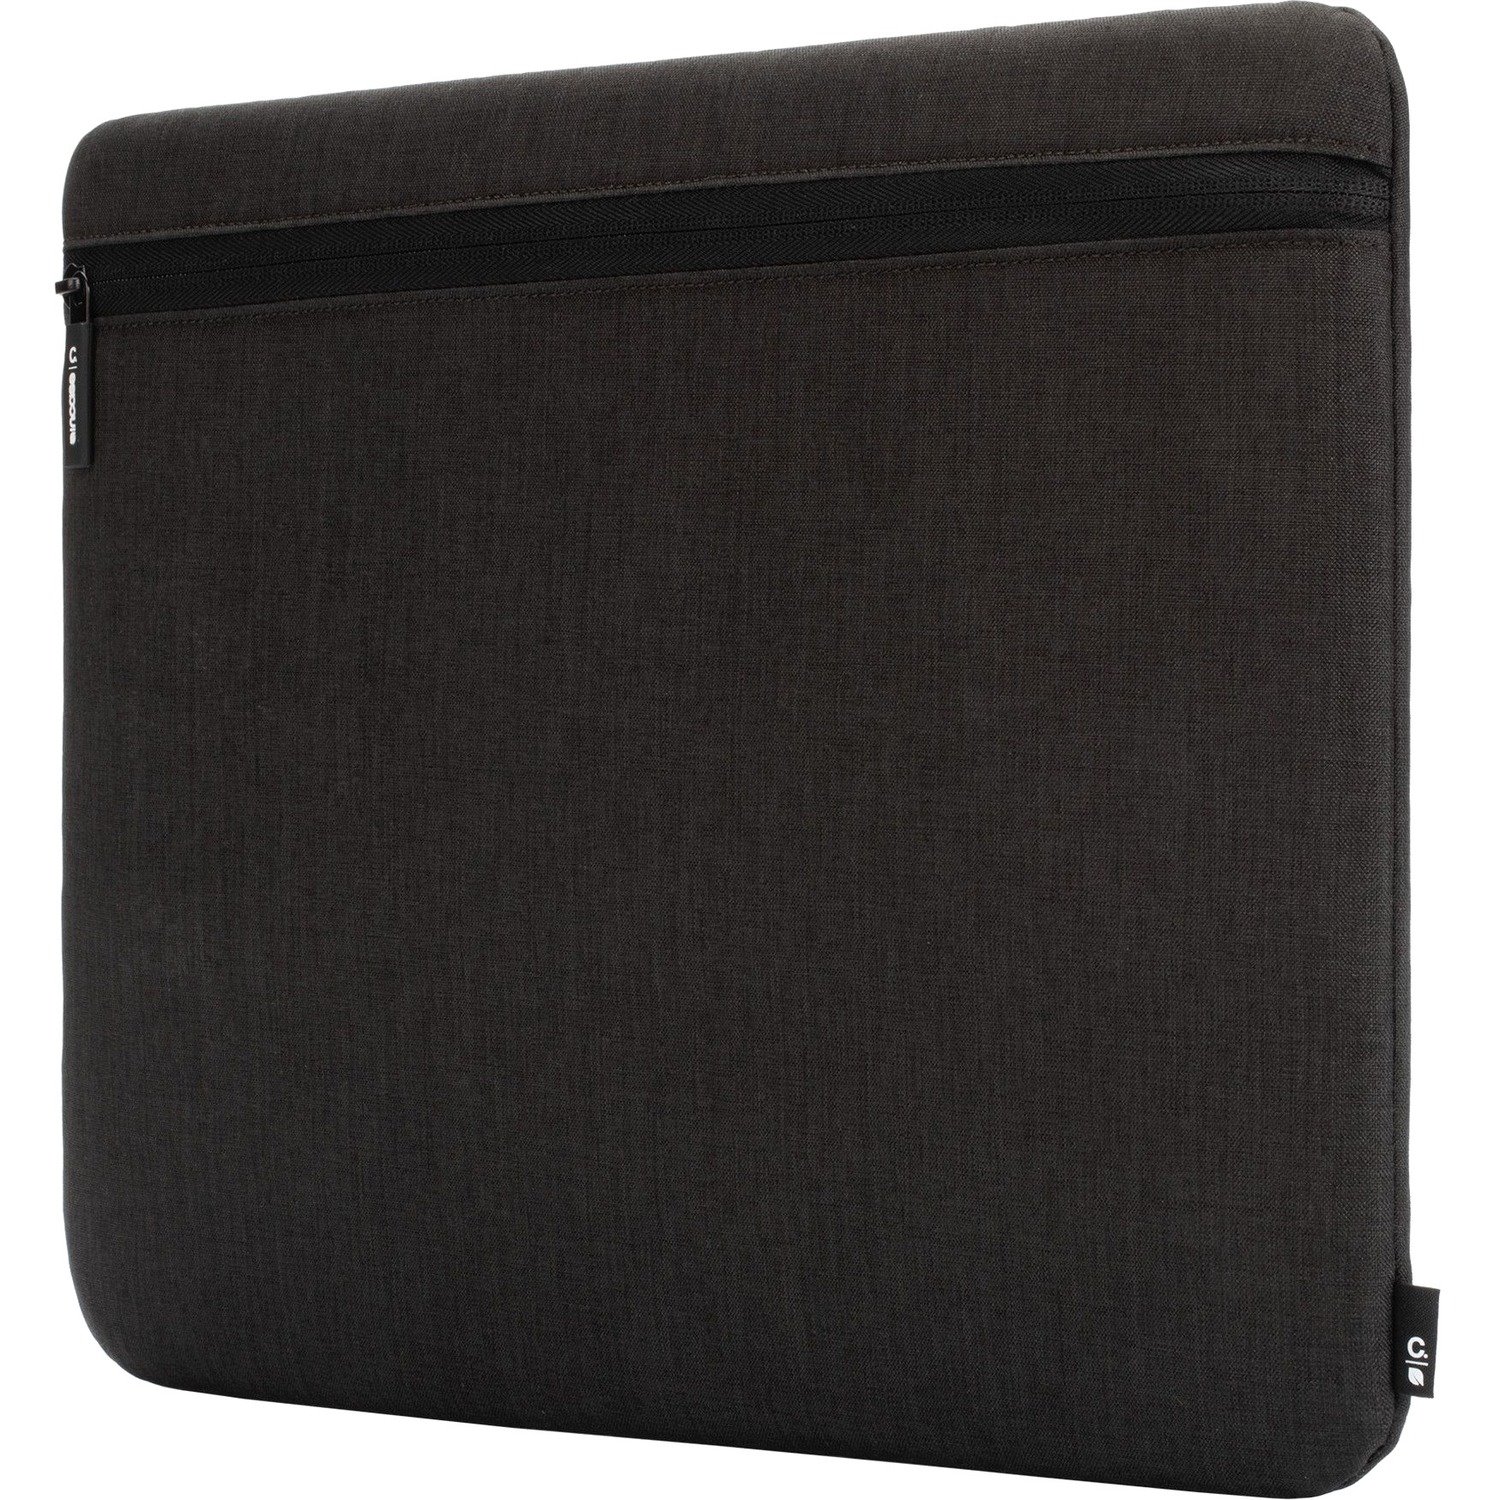 Incase Carrying Case (Sleeve) for 38.1 cm (15") Notebook - Graphite